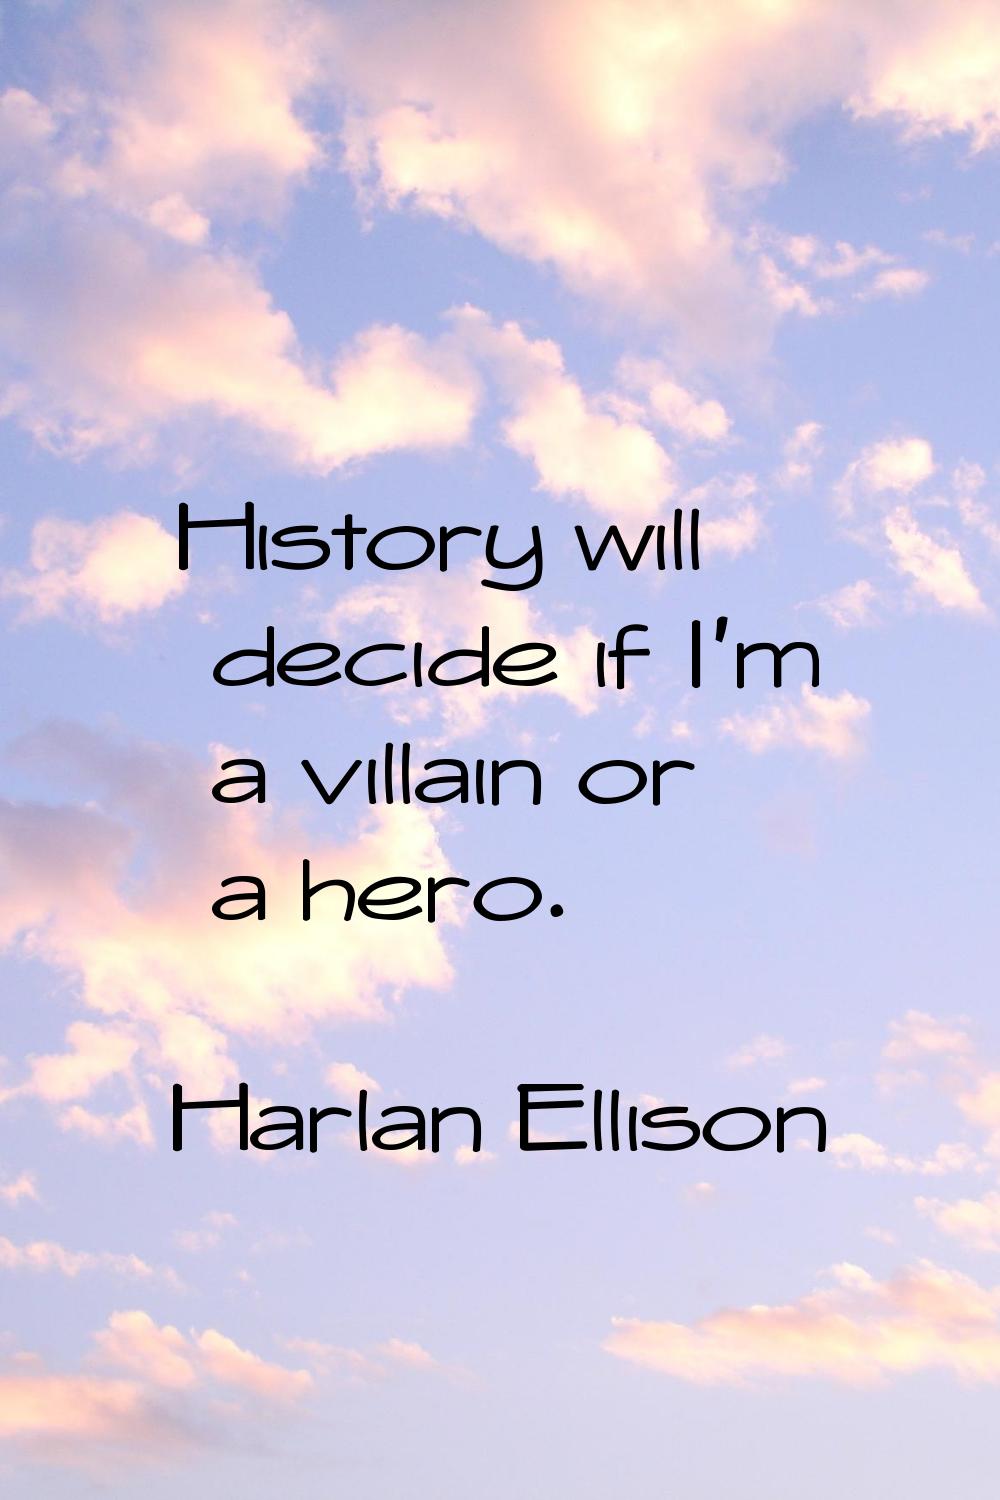 History will decide if I'm a villain or a hero.